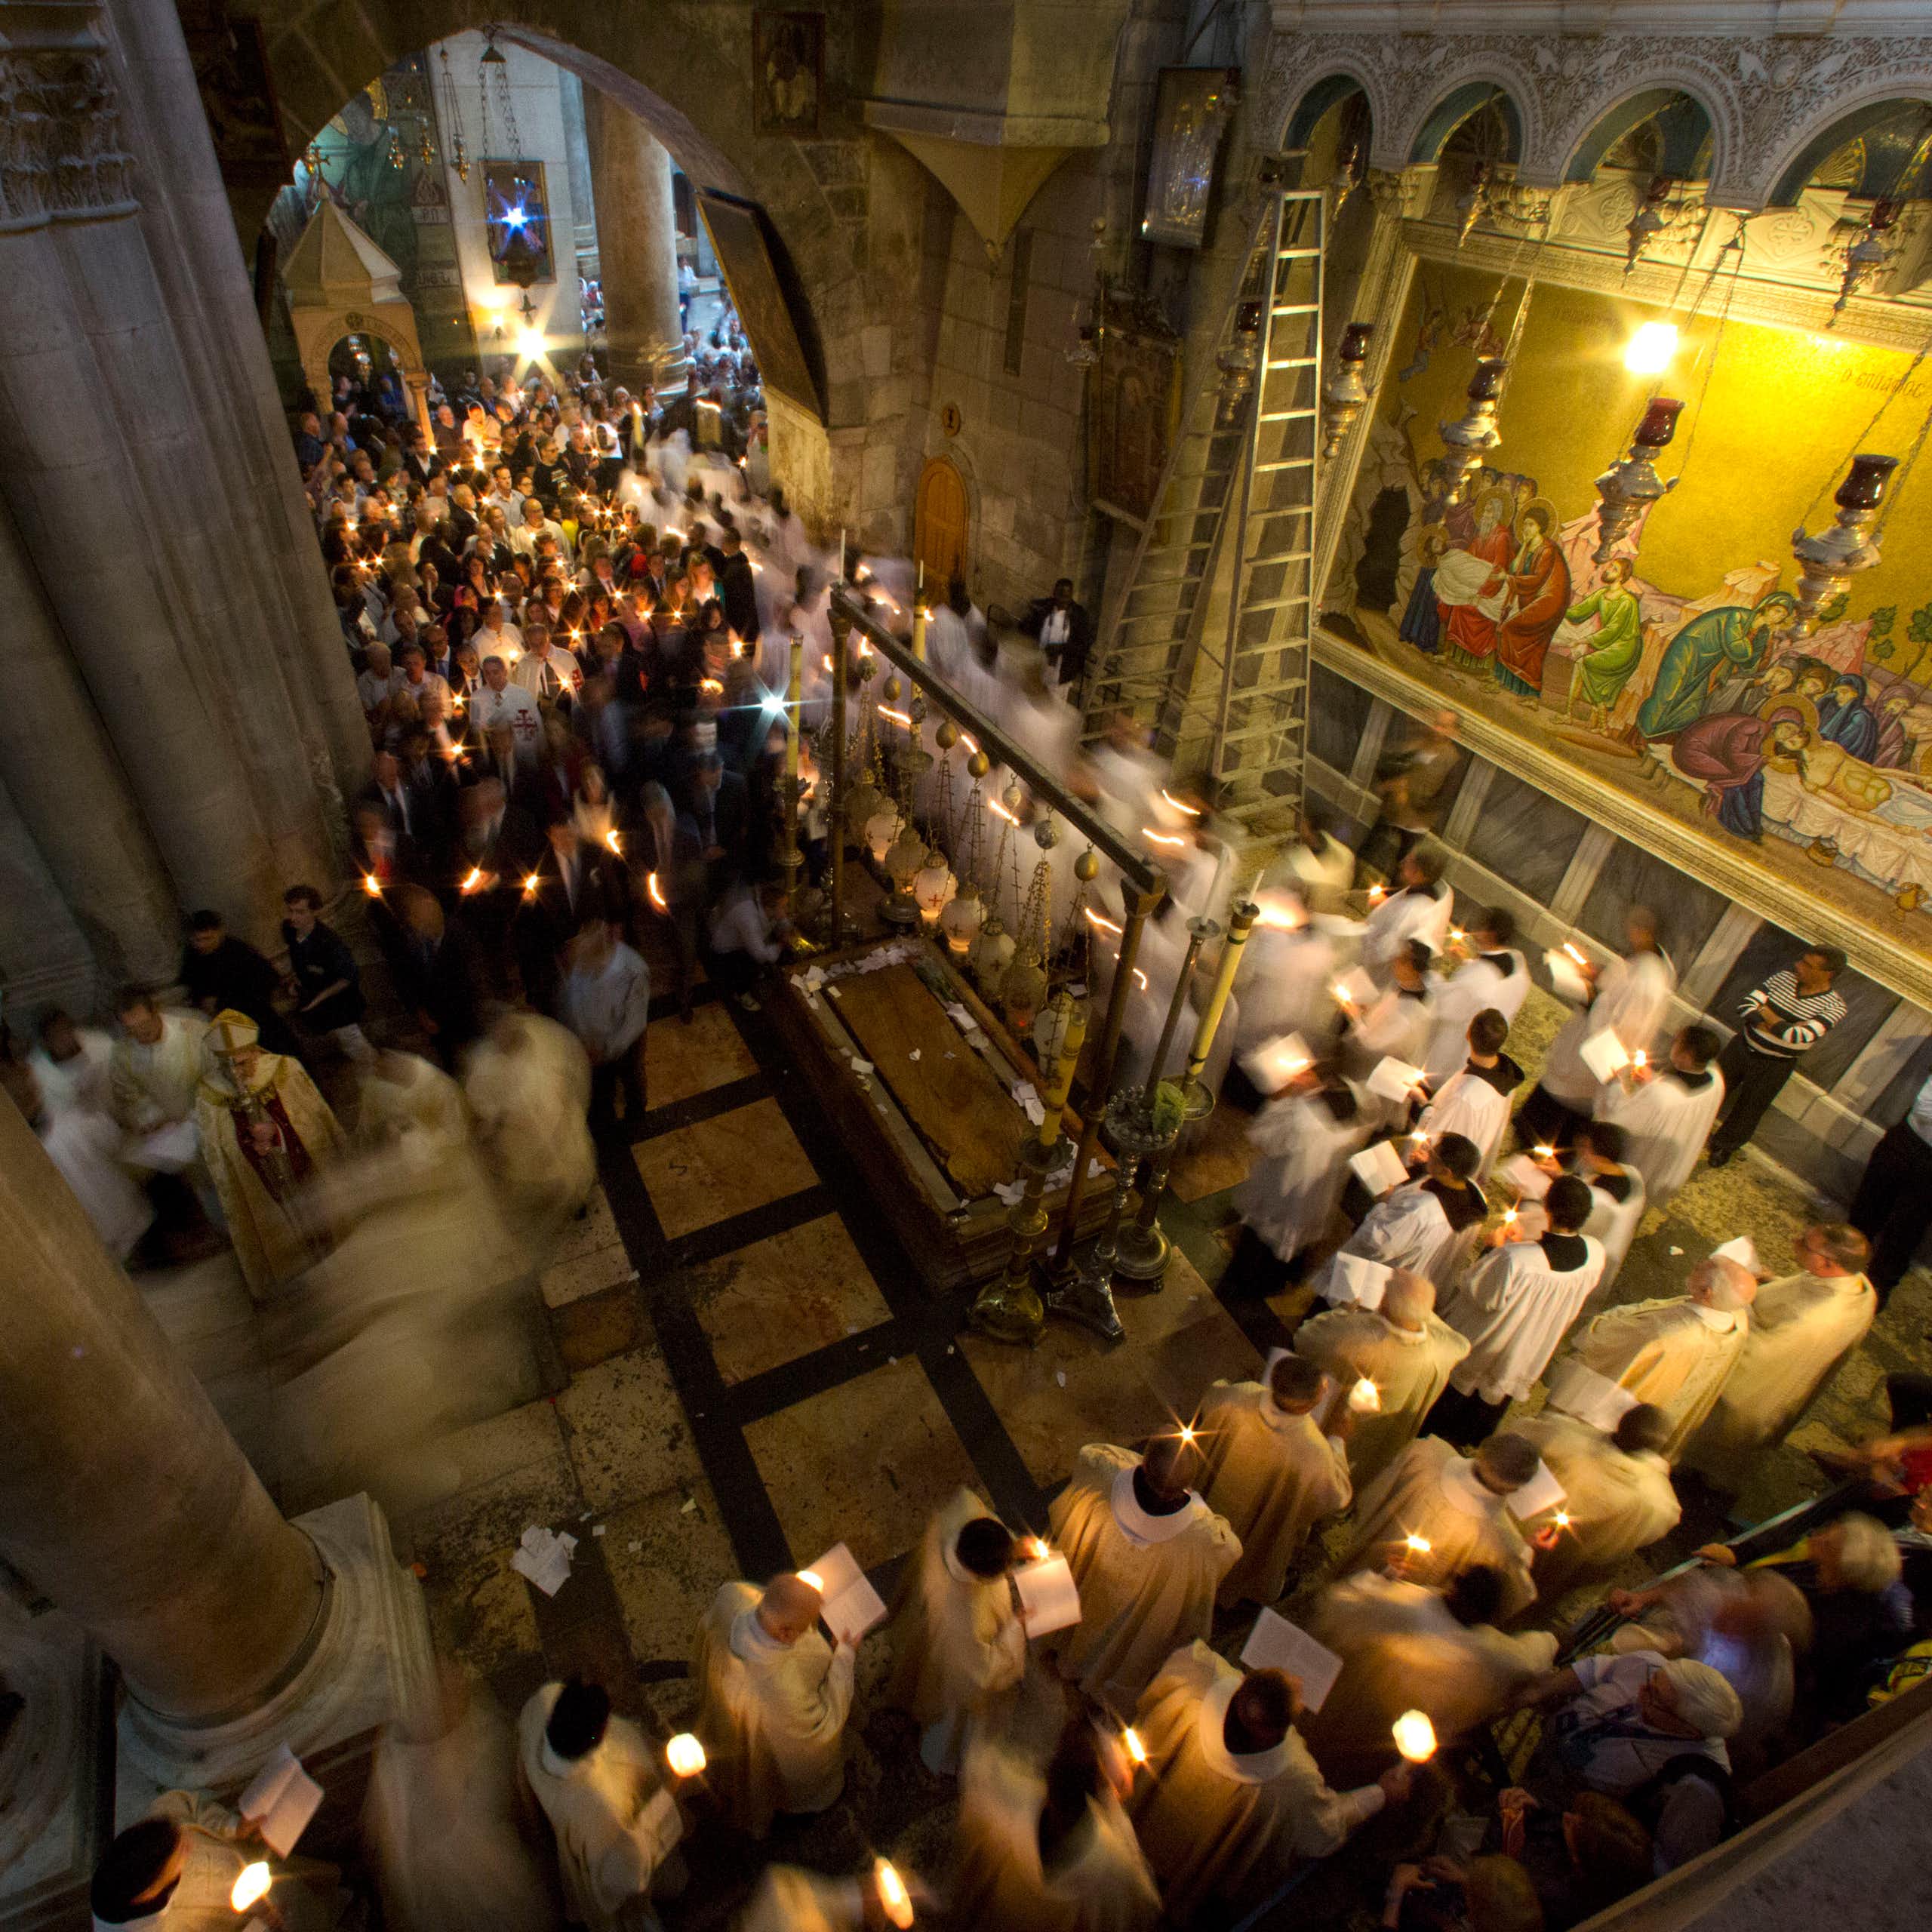 Men in white priestly robes walk in a procession while holding candles through a hallway with ornate pillars and a wall with paintings depicting followers surrounding Jesus' body.